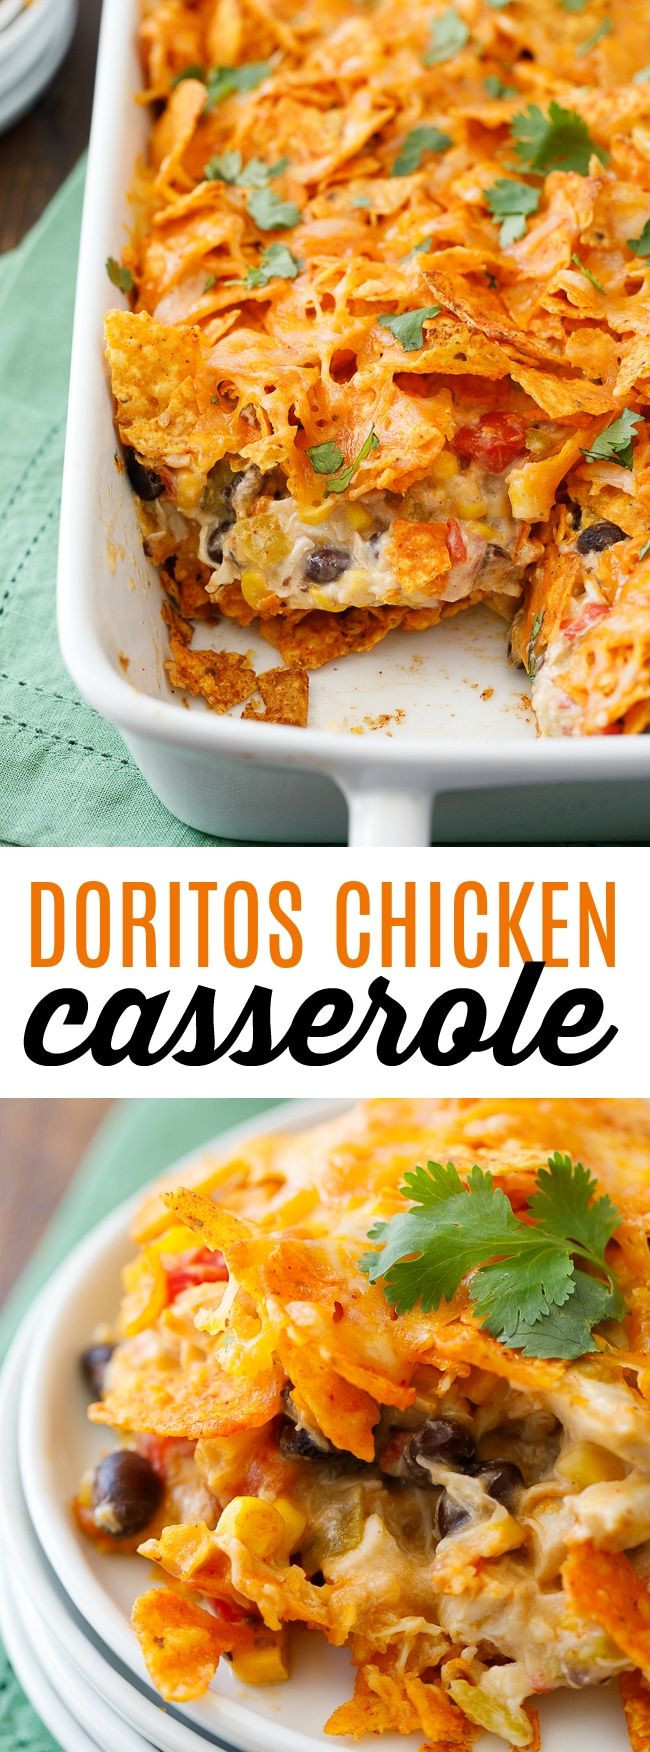 Mexican Chicken Casserole With Doritos And Velveeta
 Doritos Chicken Casserole Recipe